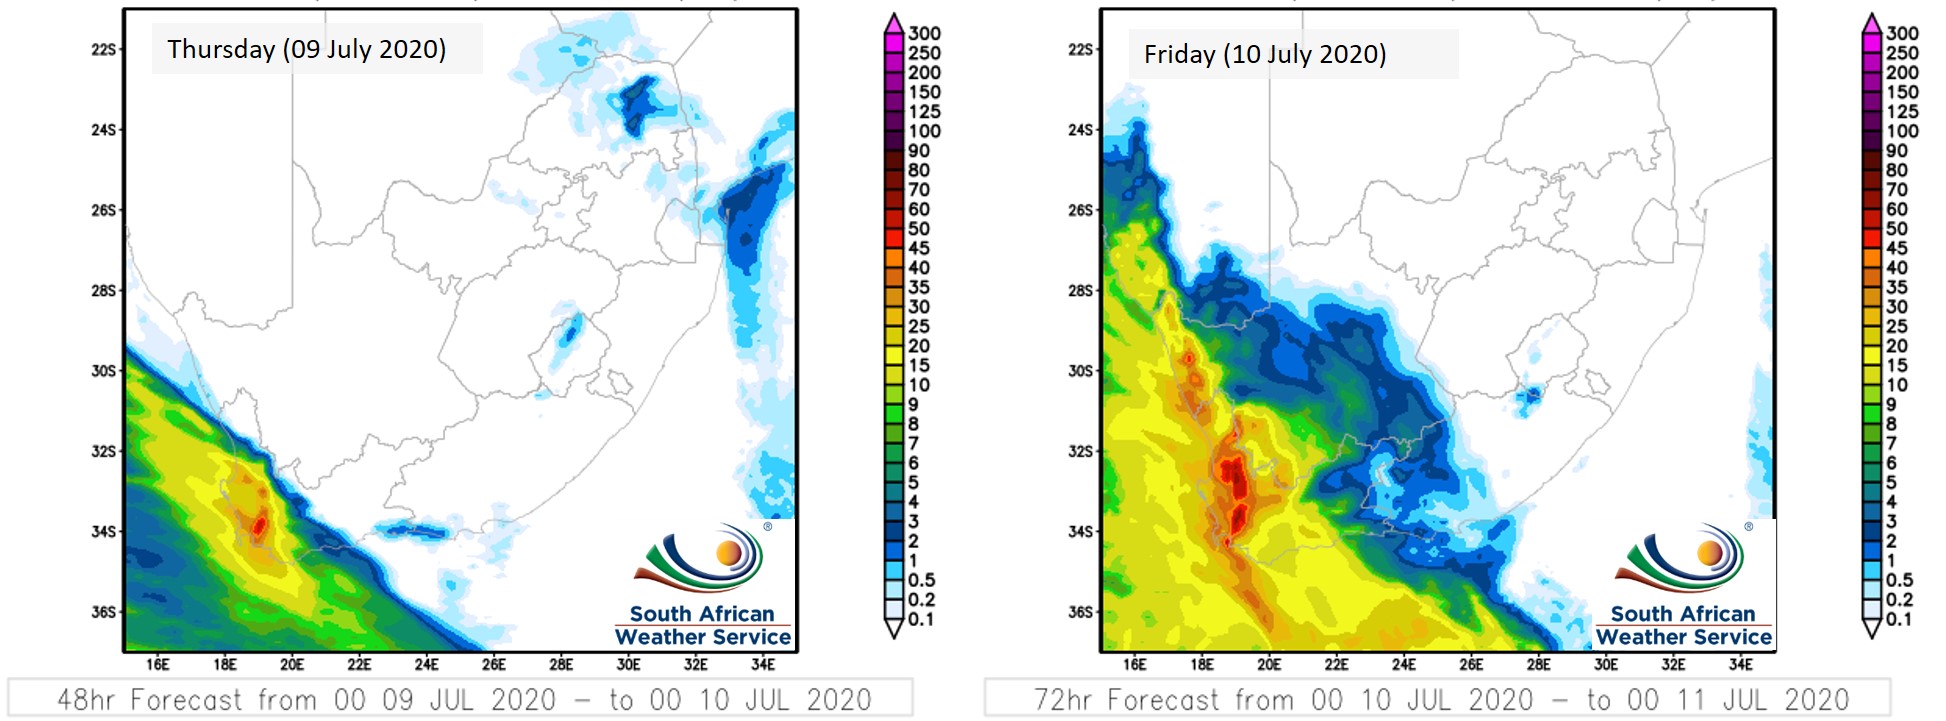 Heavy rainfall (more than 50mm) expected over the next few days especially over the western parts of the Western Cape as 2 #coldfronts make landfall. Here is the accumulated rainfall forecast for Thursday and Friday (09-10 July 2020).